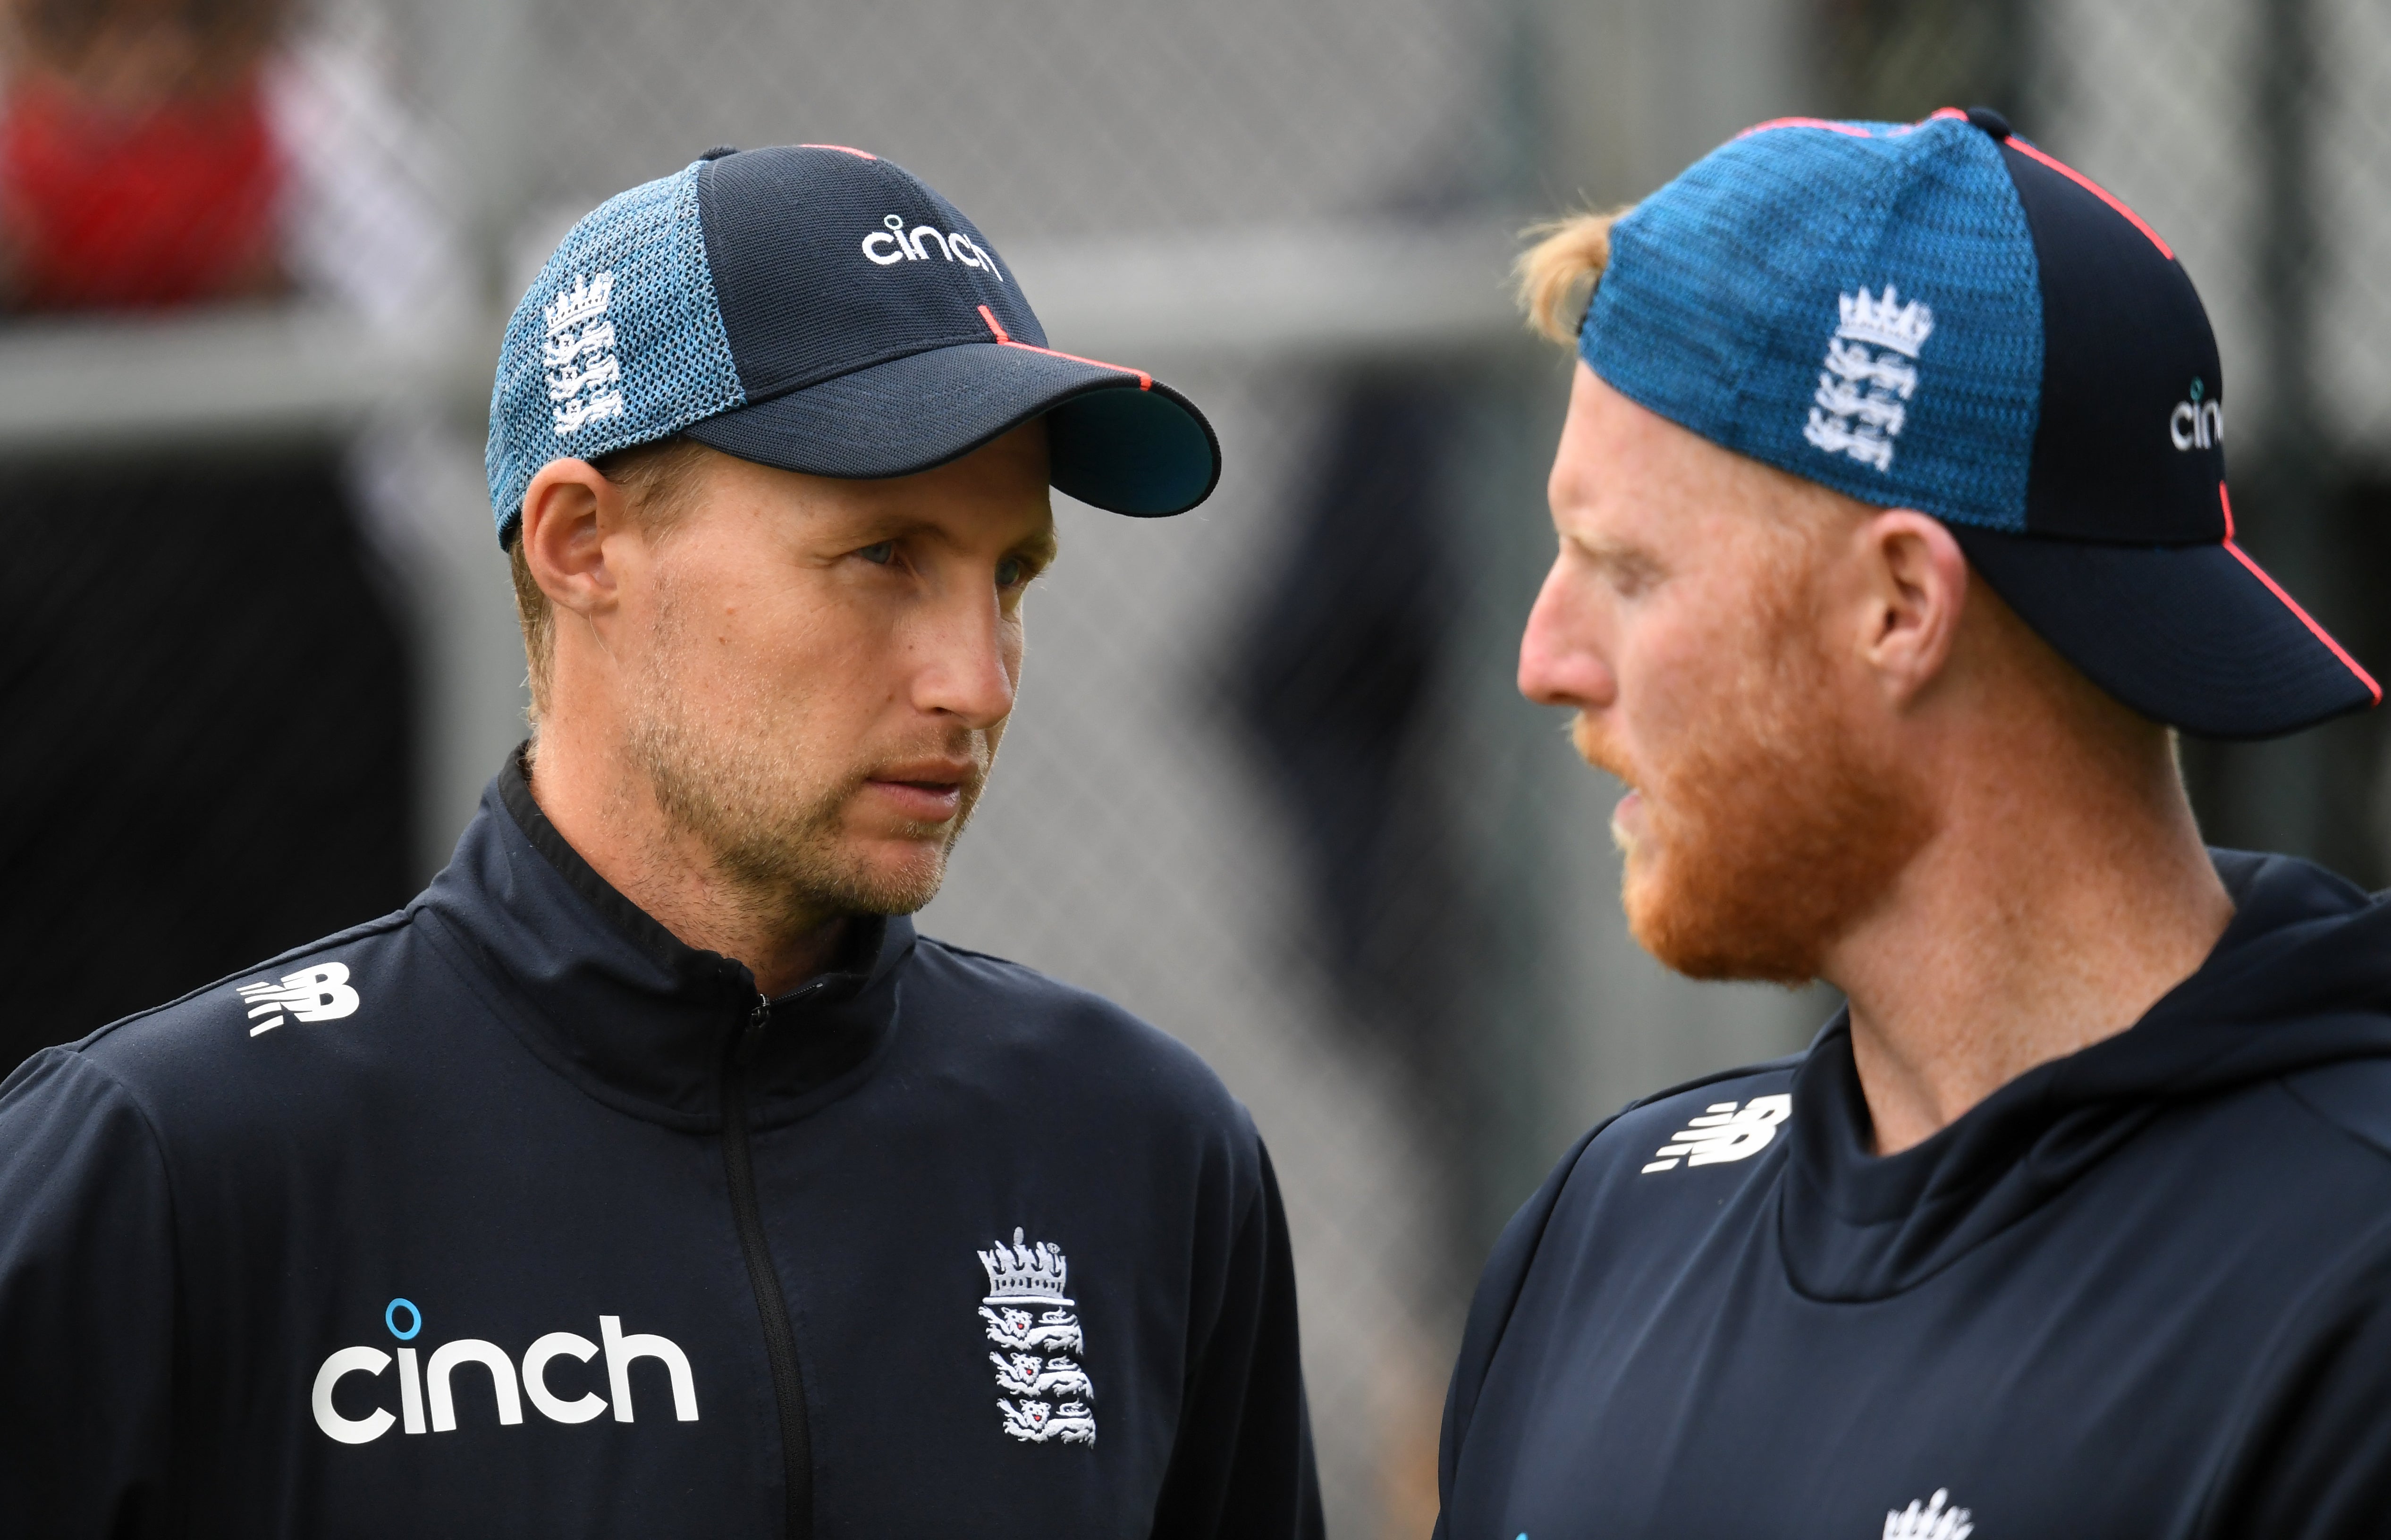 Ben Stokes, right, is the front-runner to replace Joe Root as Test captain (Darren England via AAP)